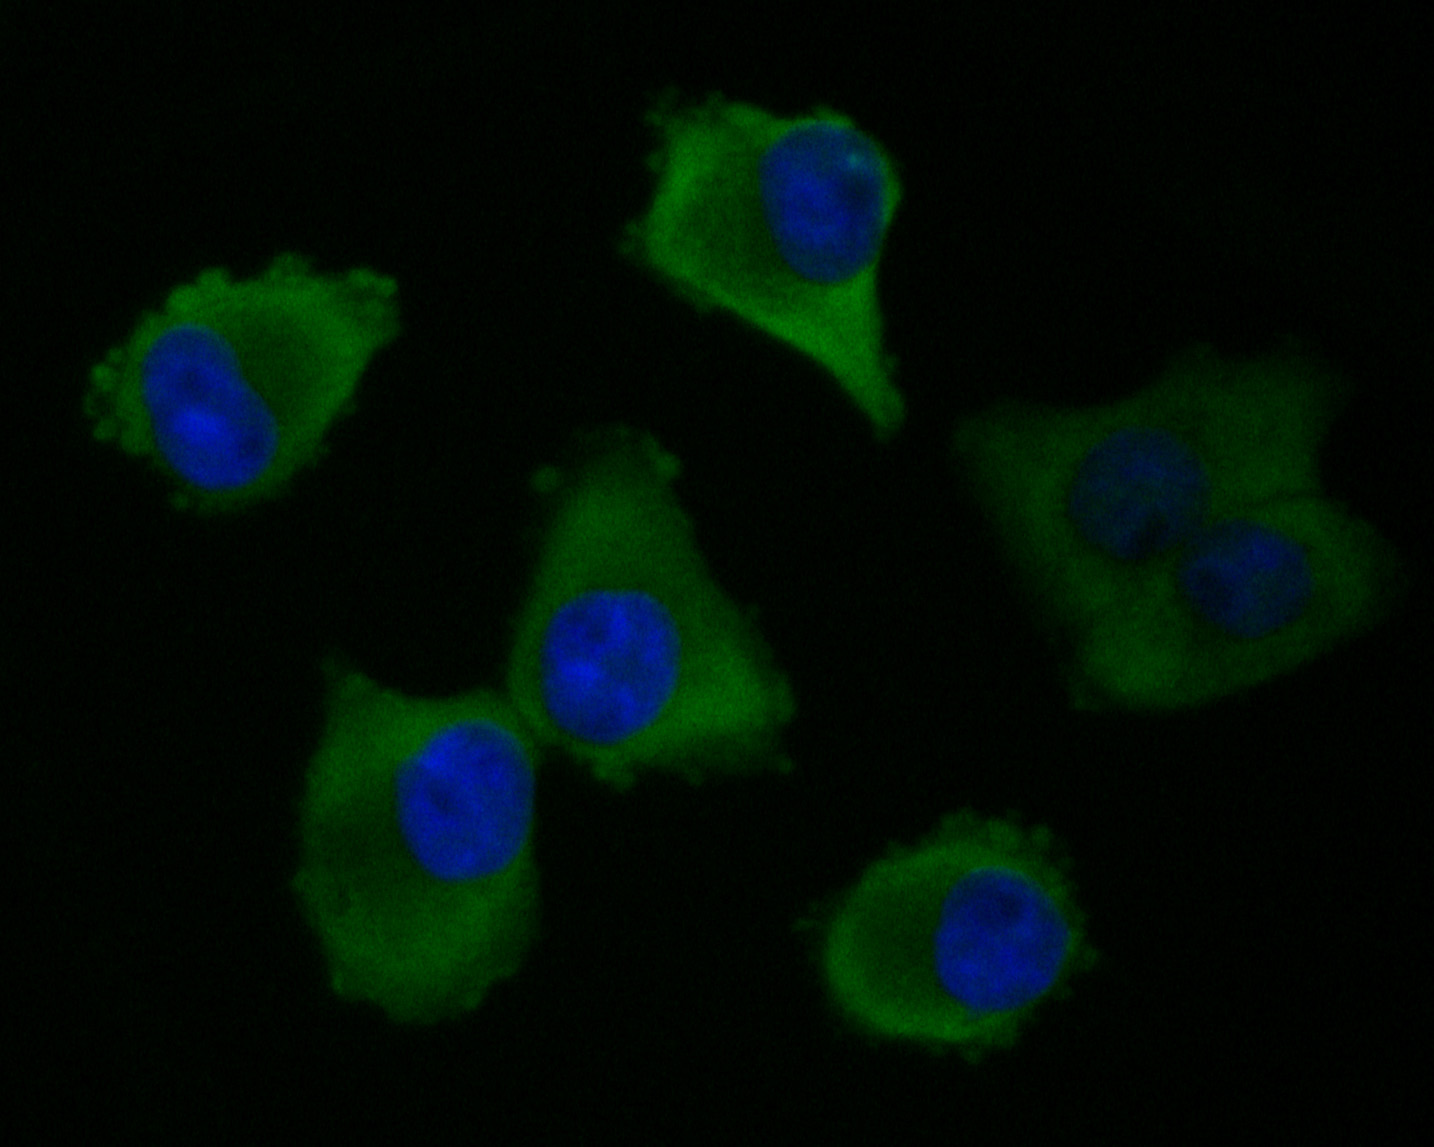 ICC staining of Elongation factor 1-gamma in PANC-1 cells (green). Formalin fixed cells were permeabilized with 0.1% Triton X-100 in TBS for 10 minutes at room temperature and blocked with 1% Blocker BSA for 15 minutes at room temperature. Cells were probed with the primary antibody (ET7110-45, 1/50) for 1 hour at room temperature, washed with PBS. Alexa Fluor®488 Goat anti-Rabbit IgG was used as the secondary antibody at 1/1,000 dilution. The nuclear counter stain is DAPI (blue).